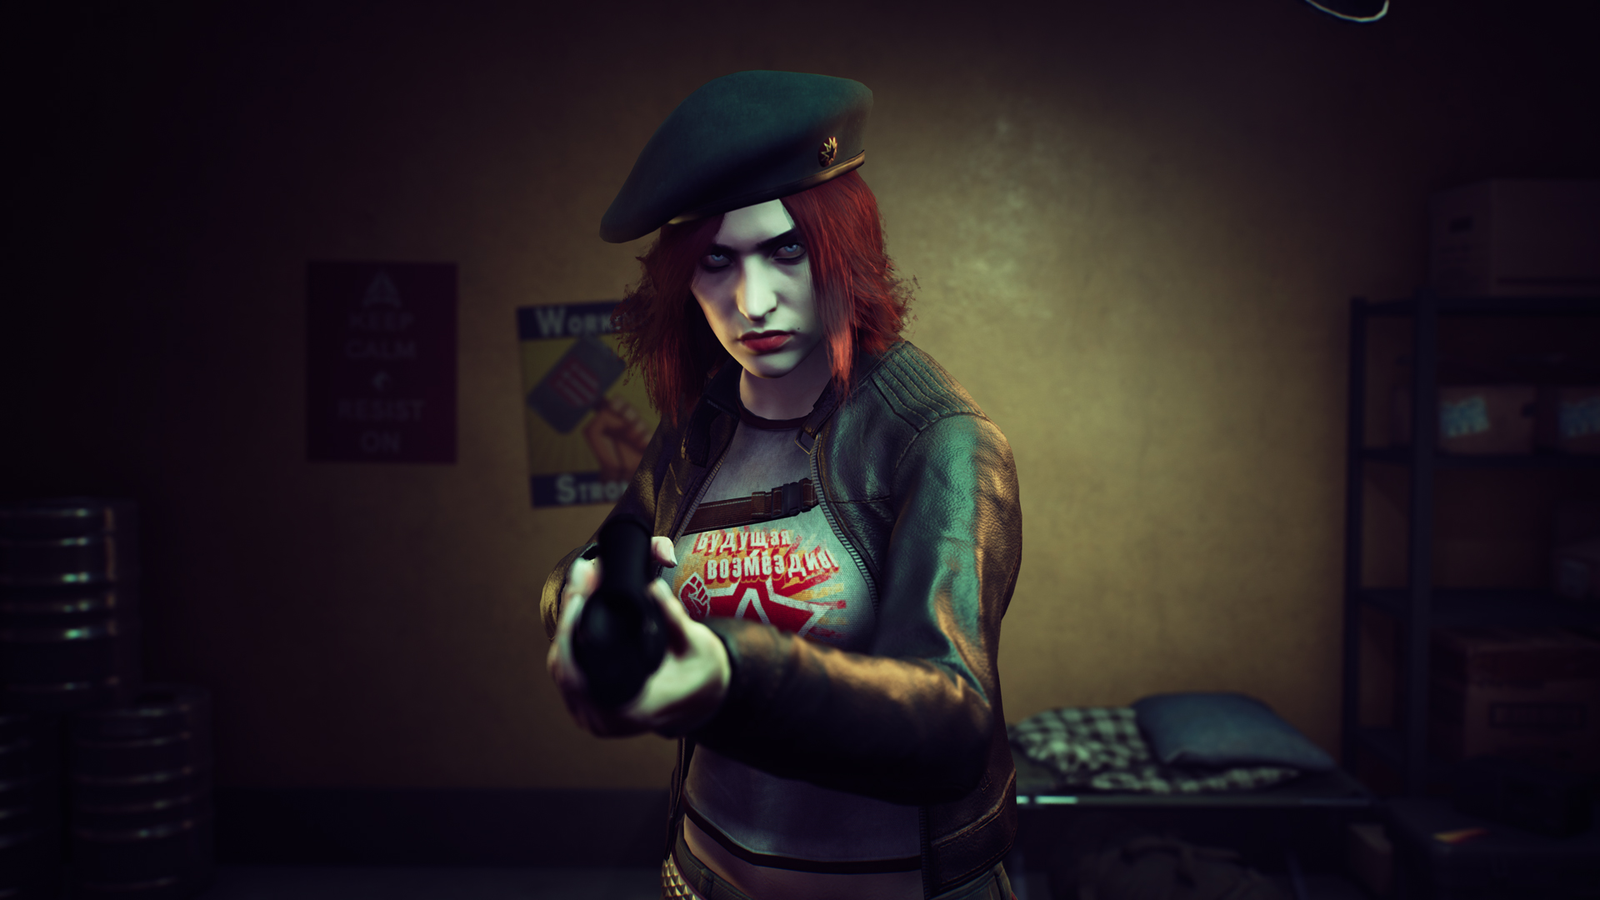 Steam Community :: Guide :: Every Outfit in Vampire the Masquerade:  Bloodlines